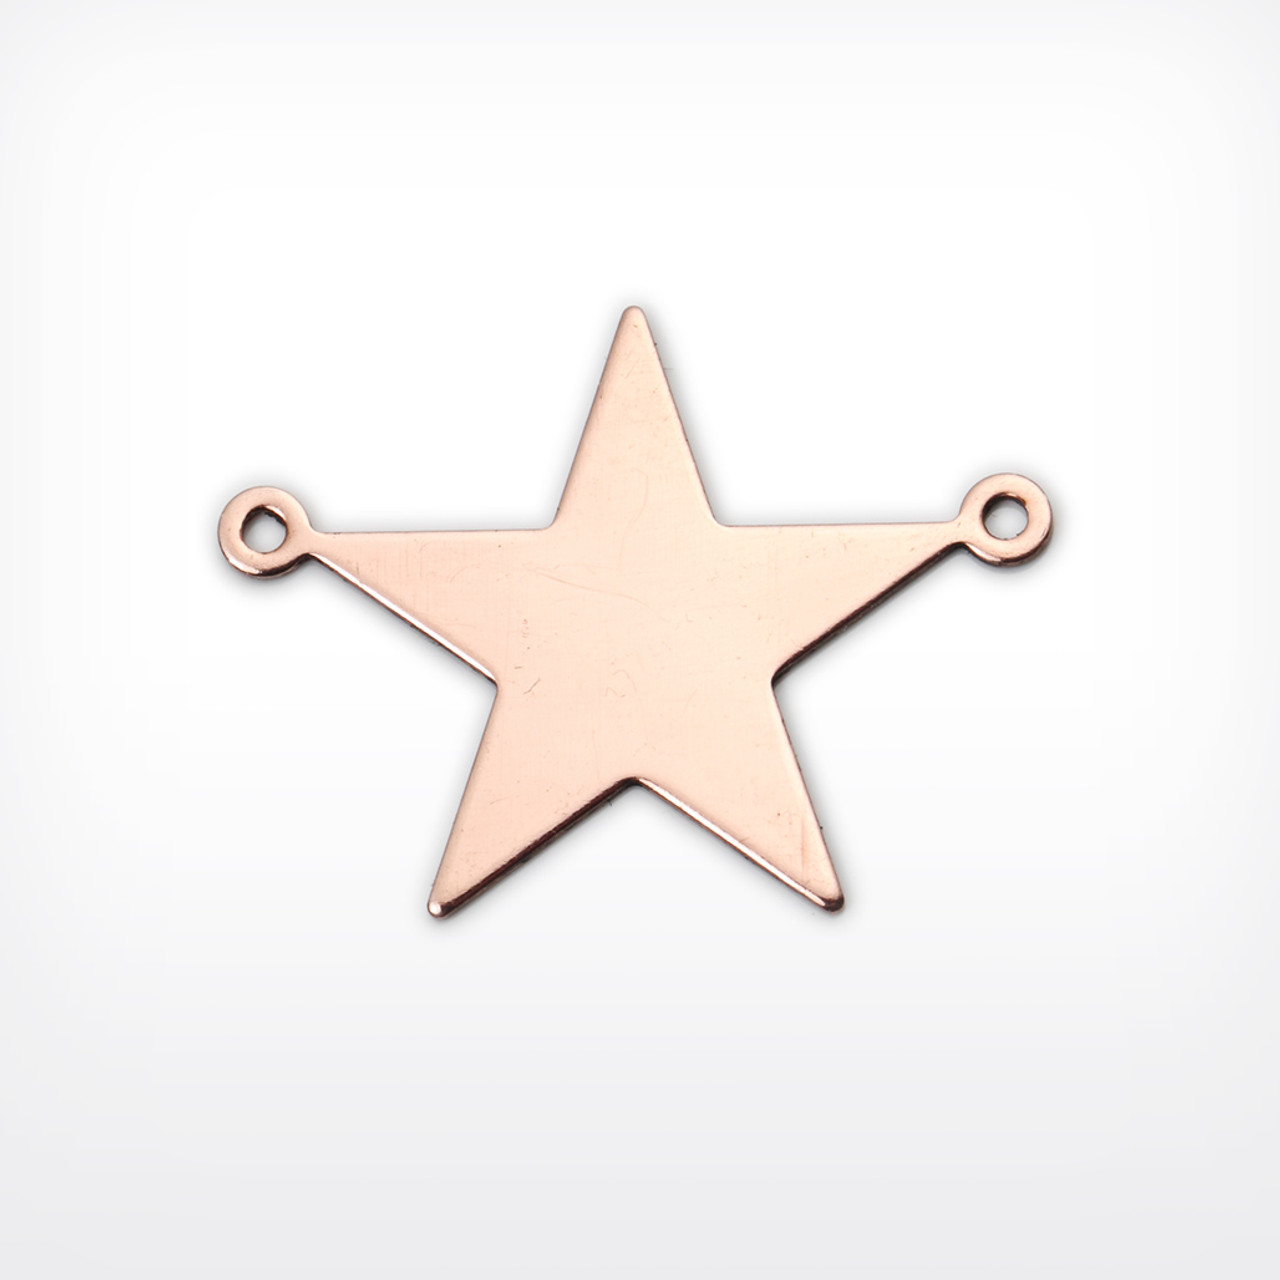 Copper Blank Star Stamped Shape for Enamelling & Other Crafts